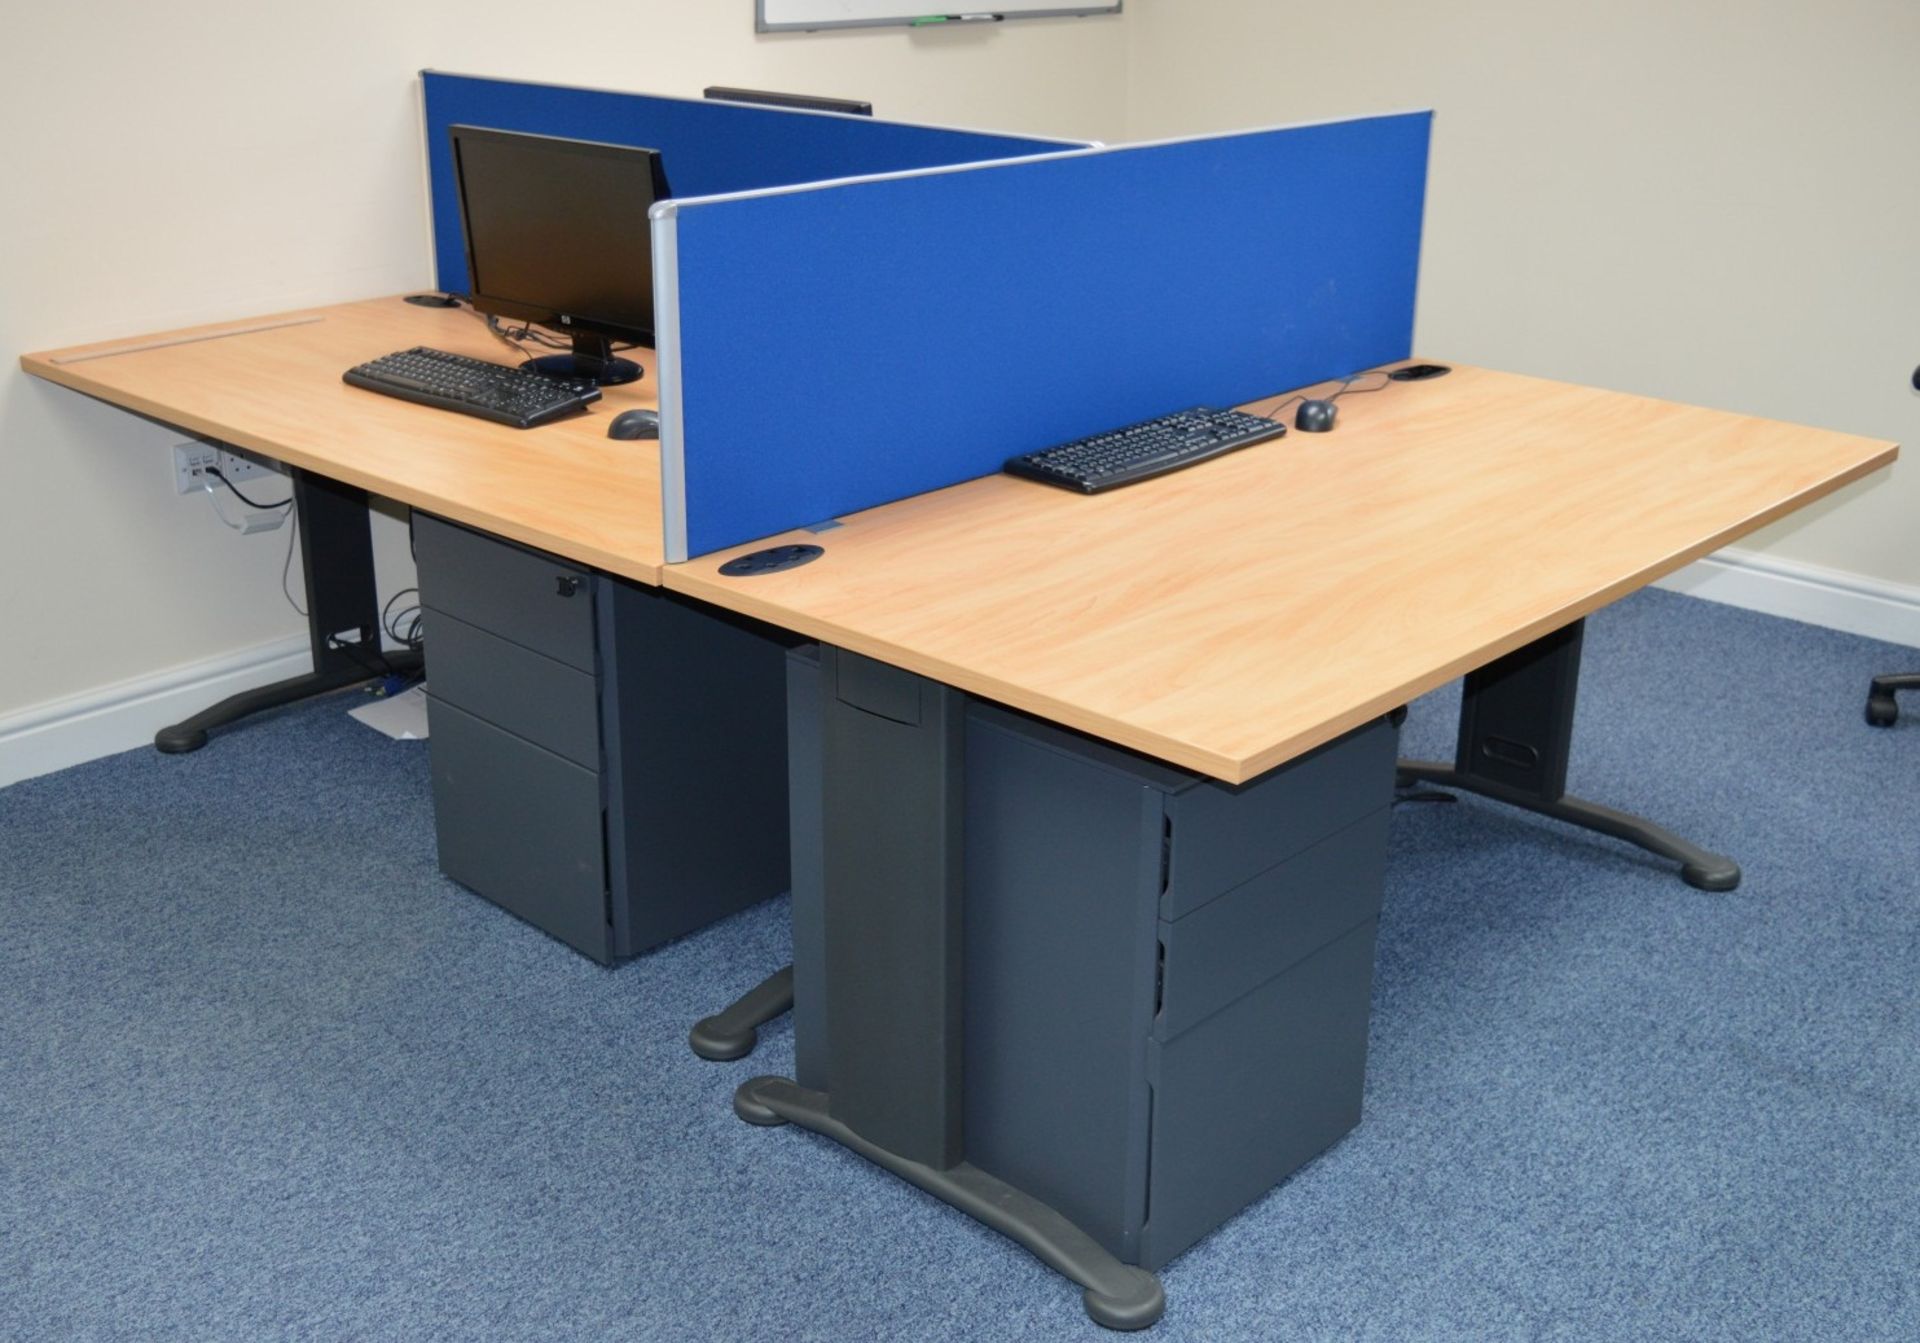 1 x Tripod Office Workstation Desk With Chairs - Suitable For 3 Users - Includes Three Premium - Image 2 of 11